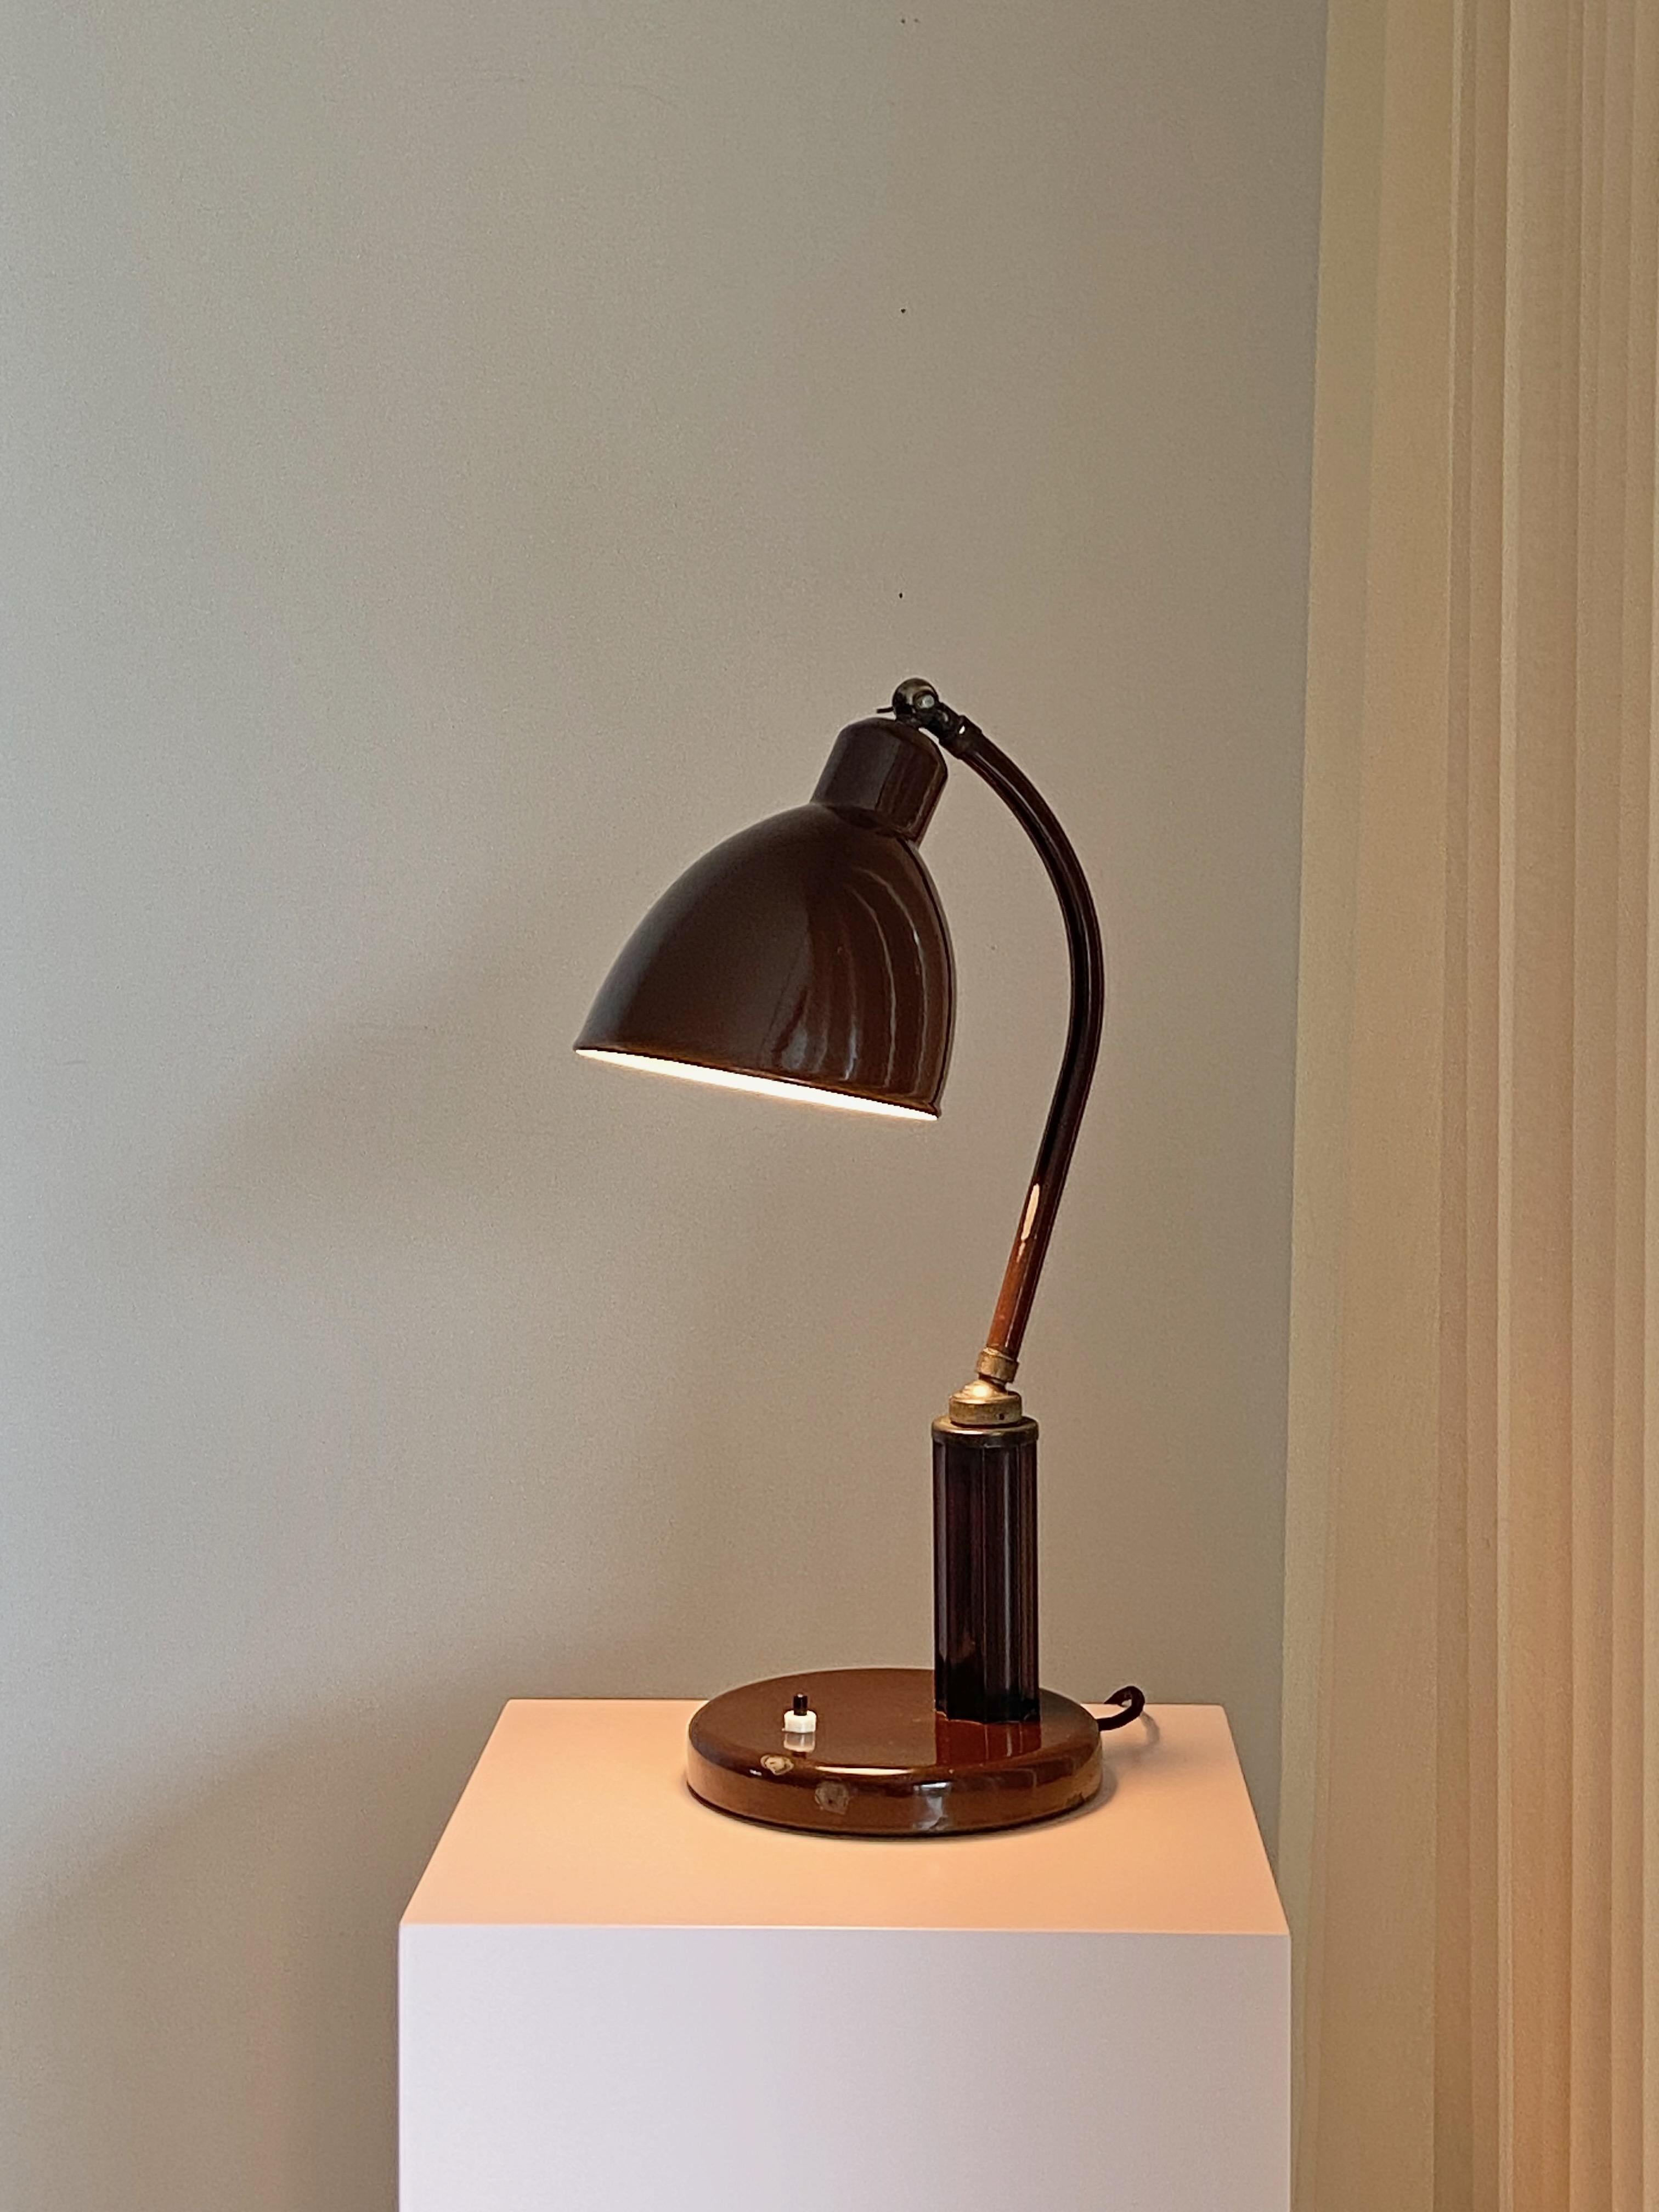 Molitor Grapholux Lamp Brown Enamel and Bakelite Stick by Christian Dell 1930s For Sale 4